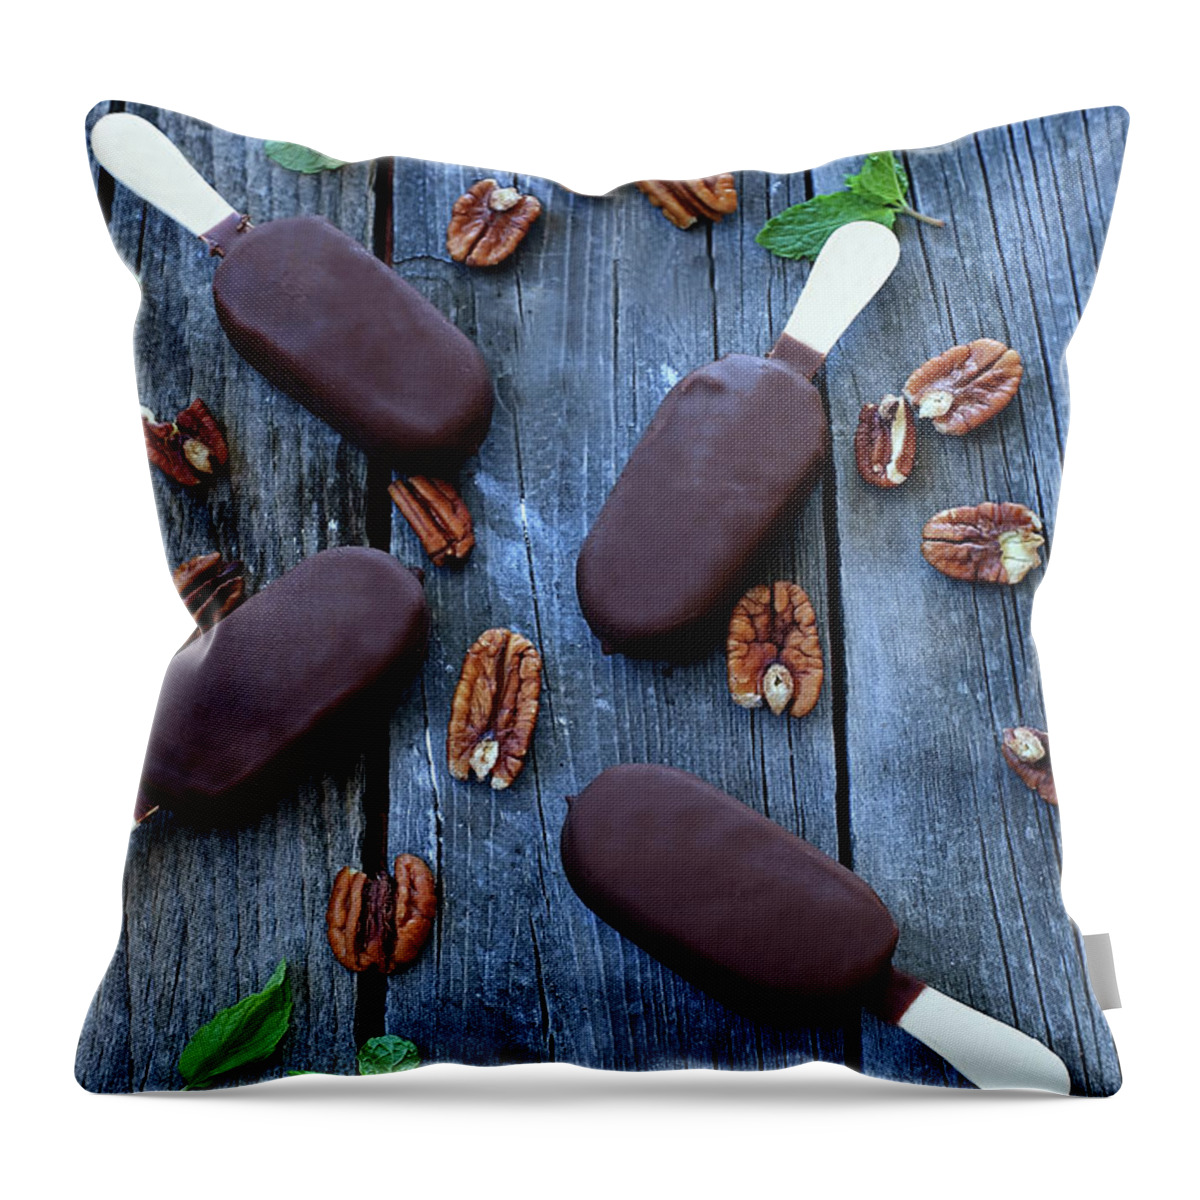 Temptation Throw Pillow featuring the photograph Chocolate Ice Cream by Kyoko Hasegawa Photography